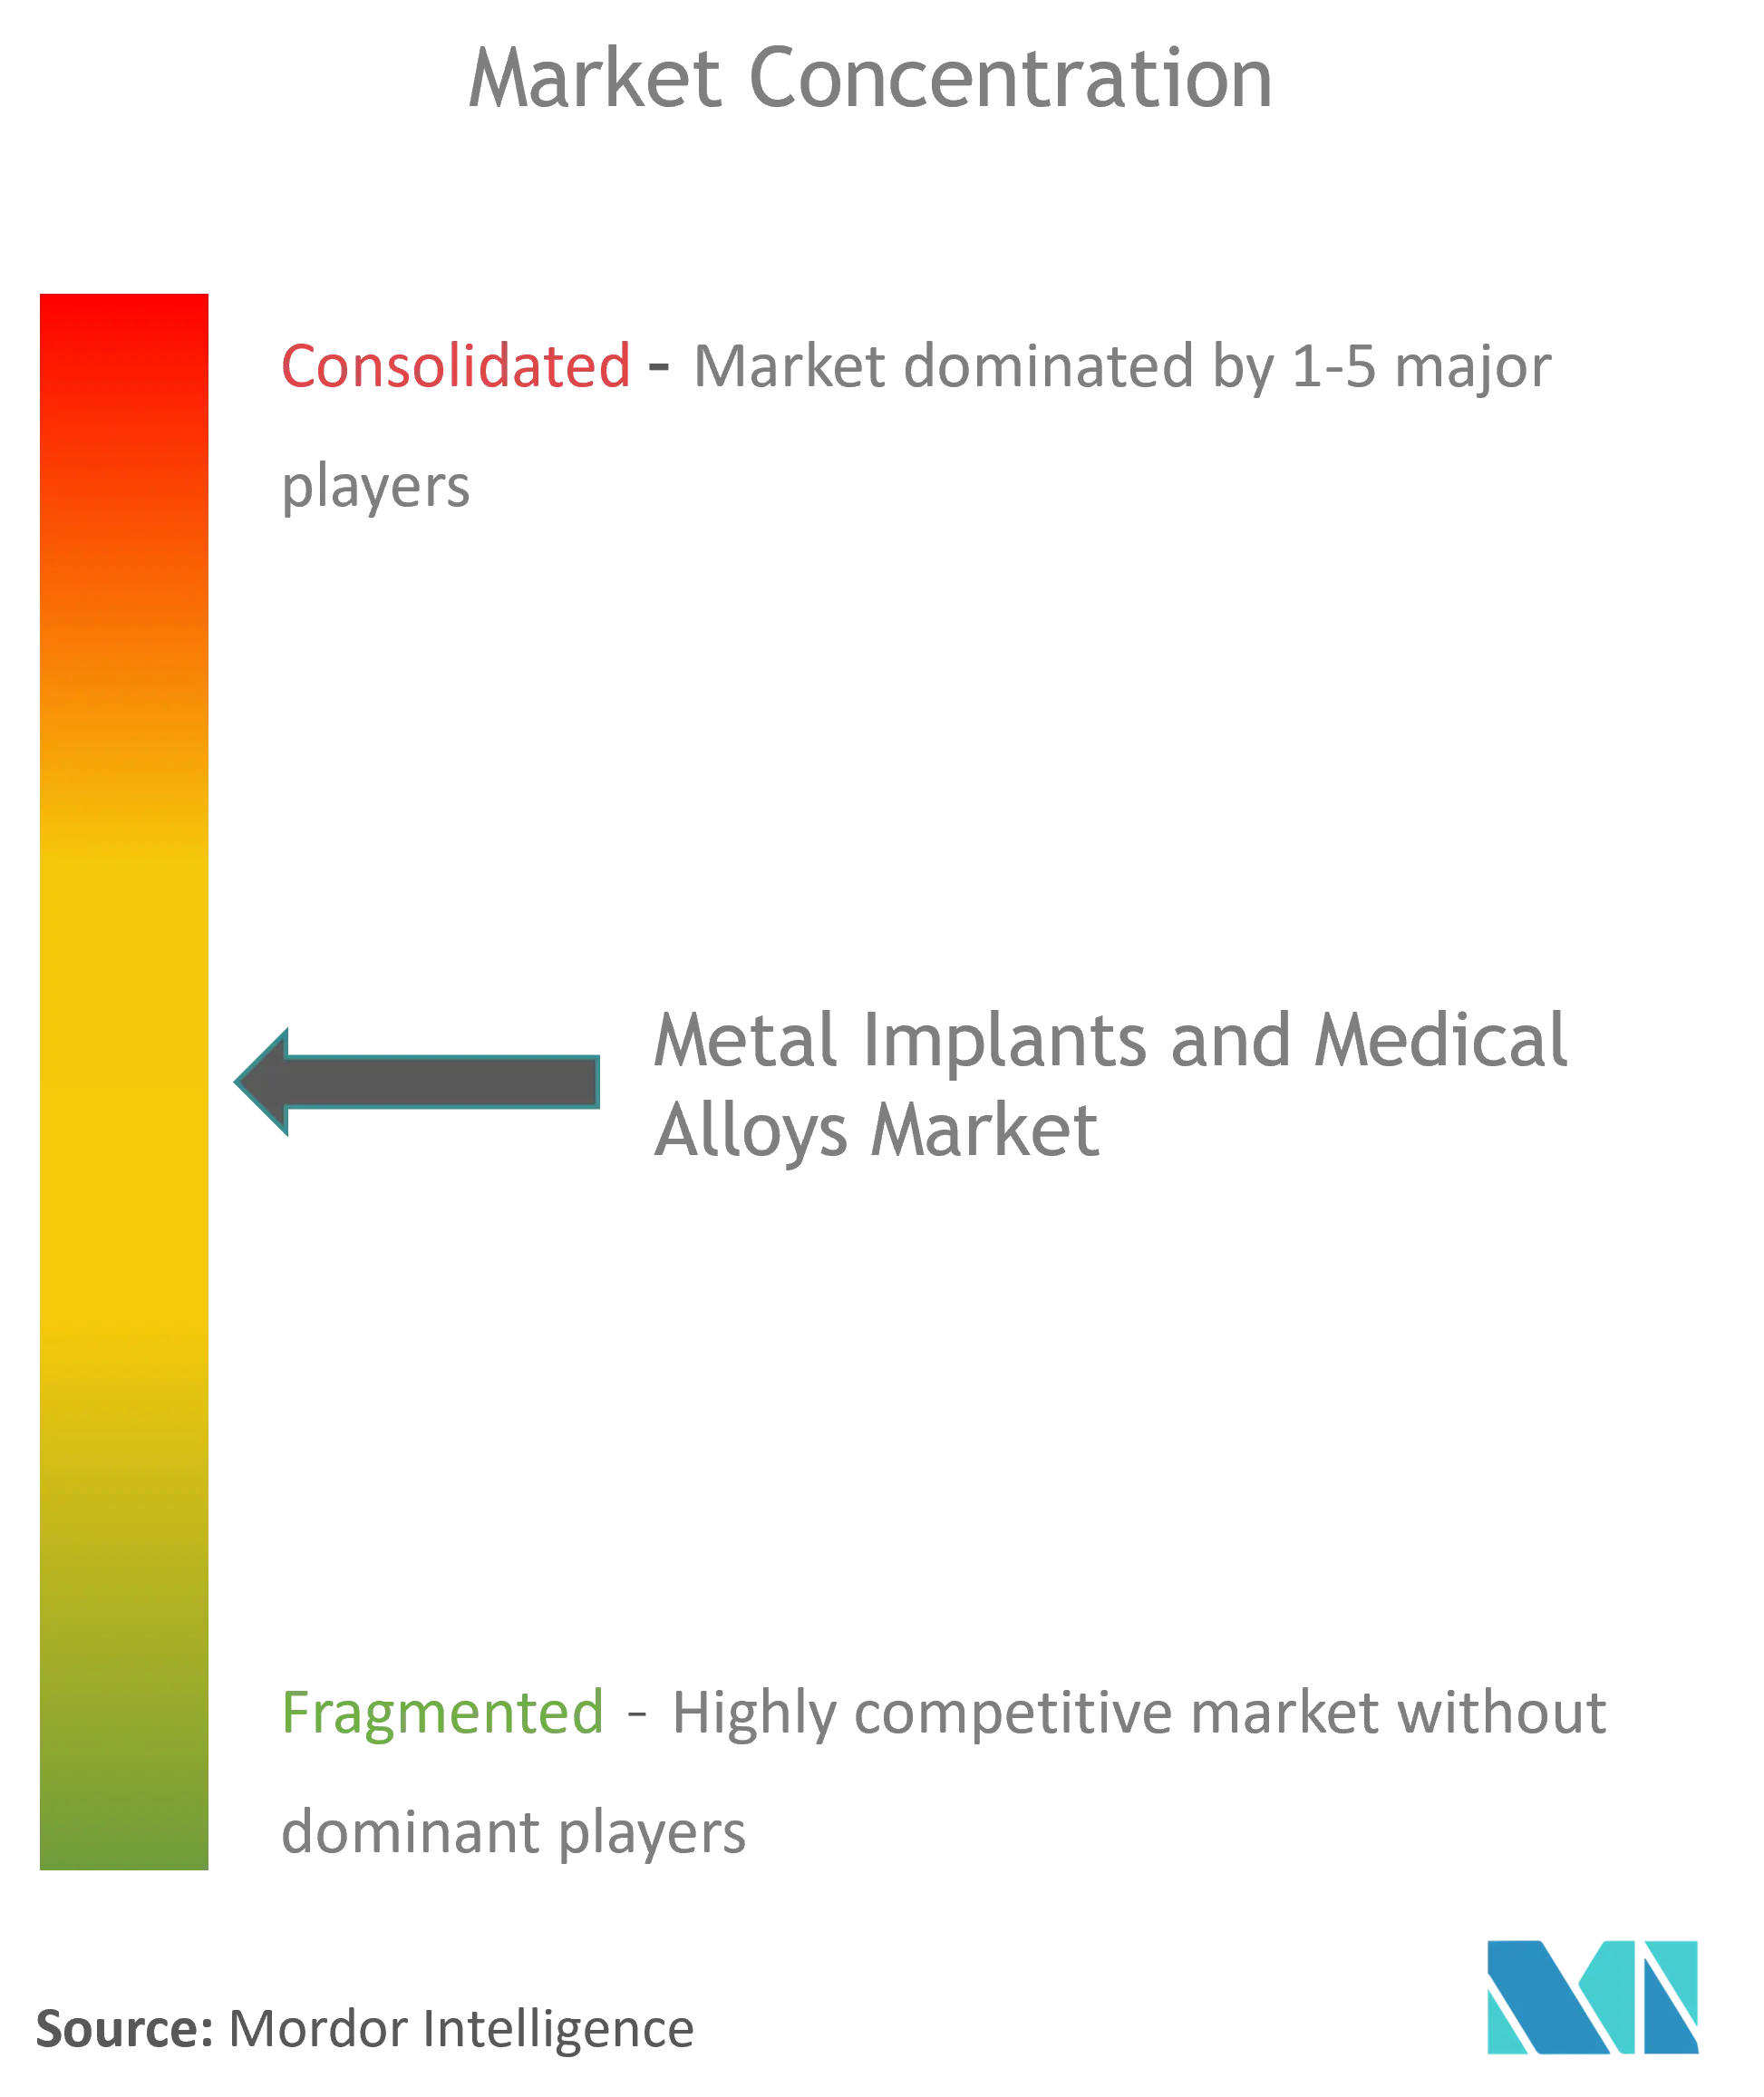 Metal Implants and Medical Alloys Market Concentration